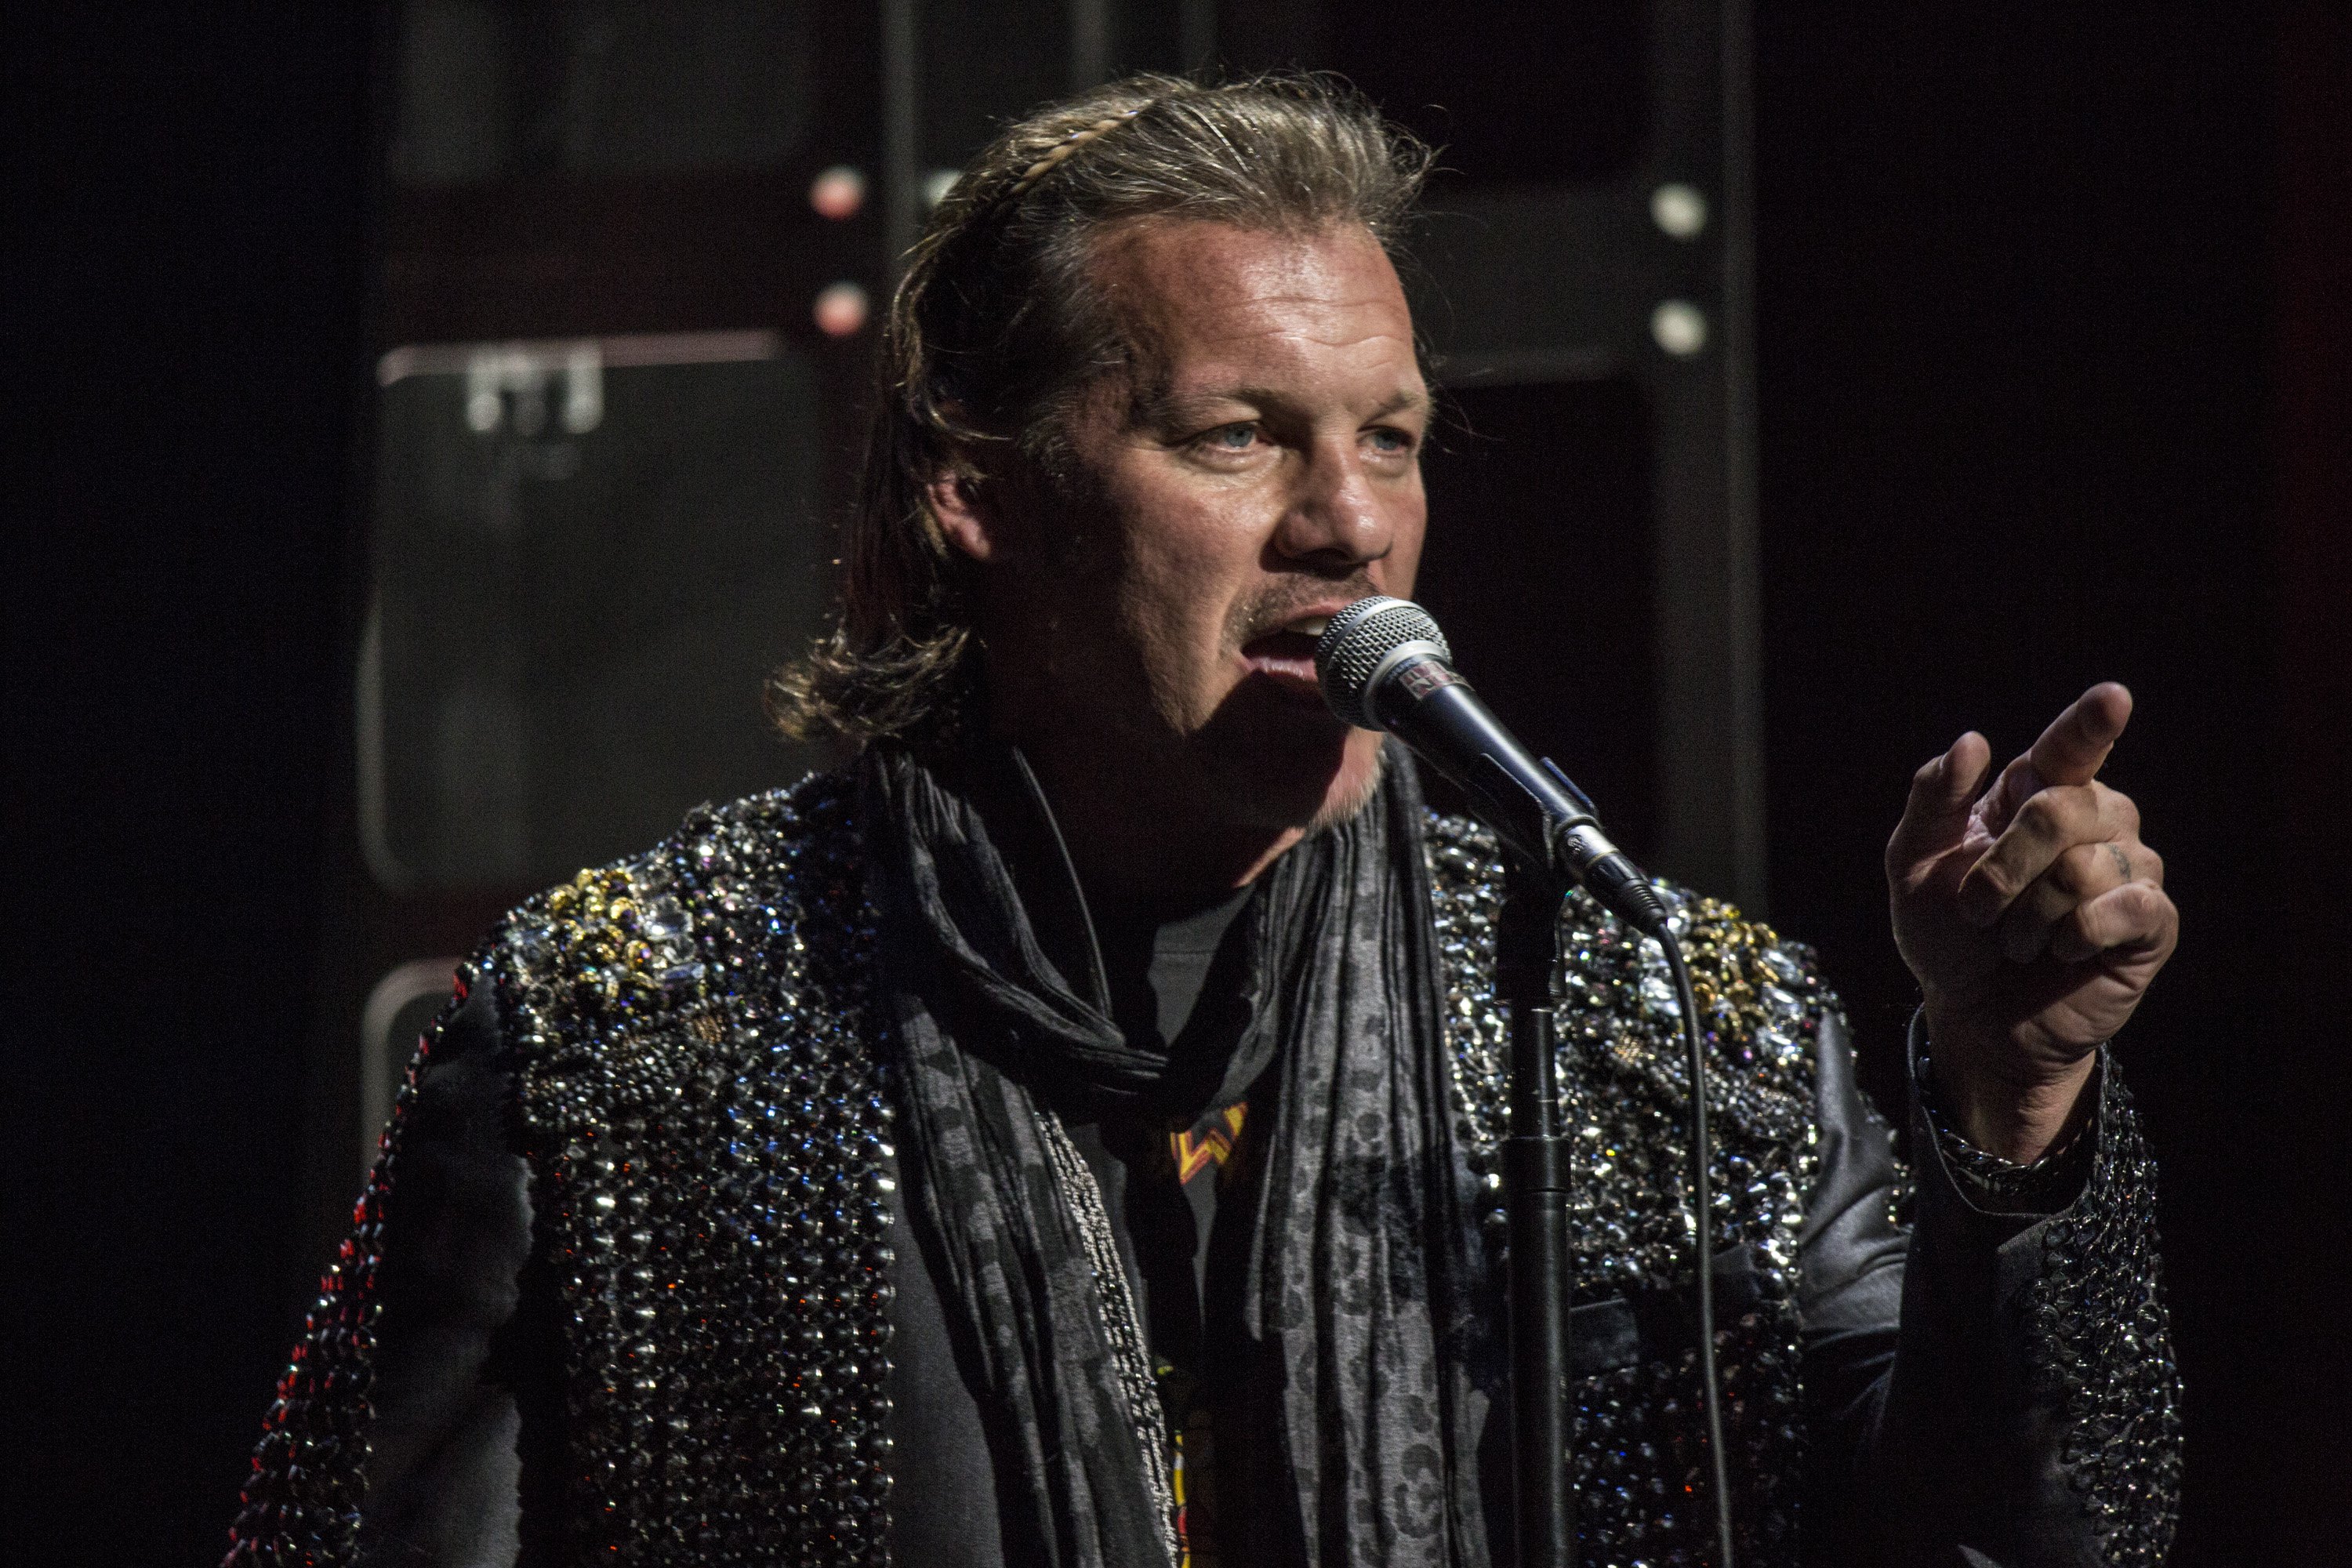 Backstage Photos Of Chris Jericho Dressed Up As Pentagon At All In